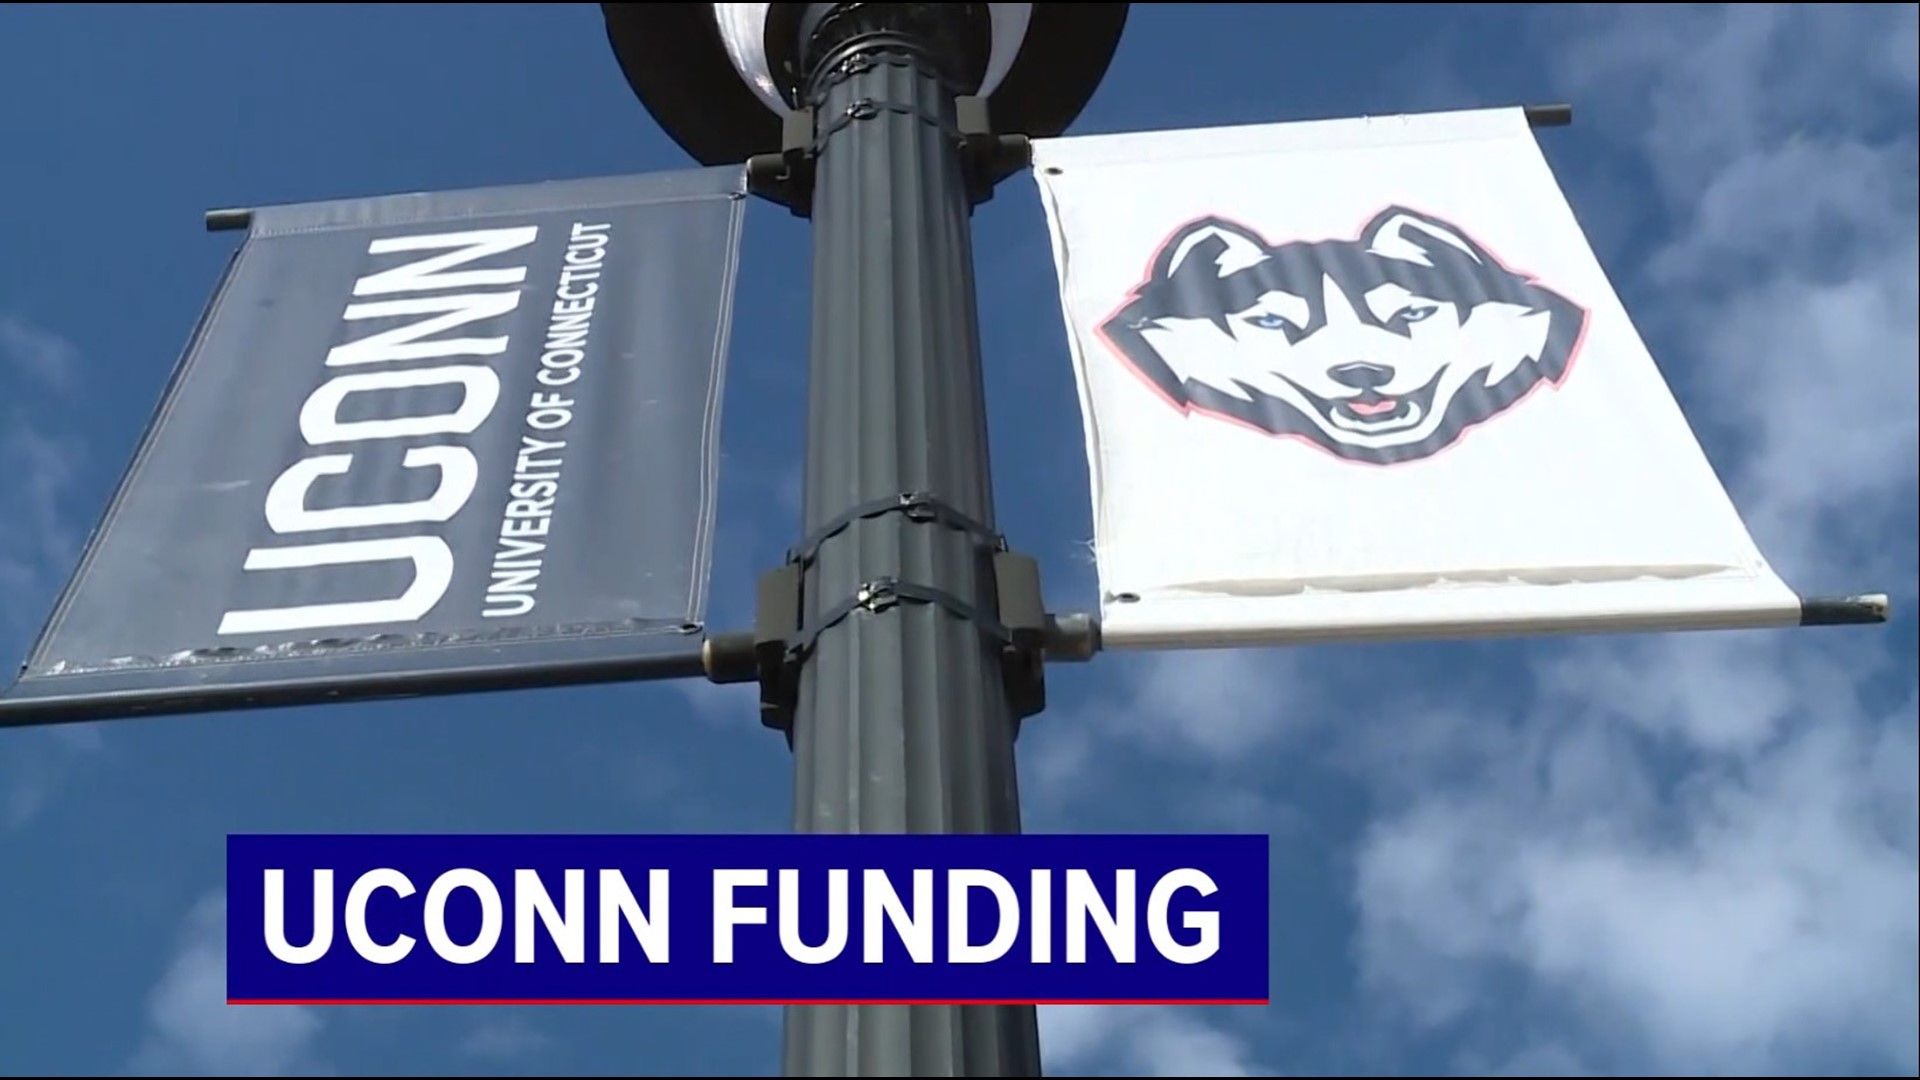 UConn is facing a budget shortfall of $96 million at the same time the state celebrates its NCAA success.